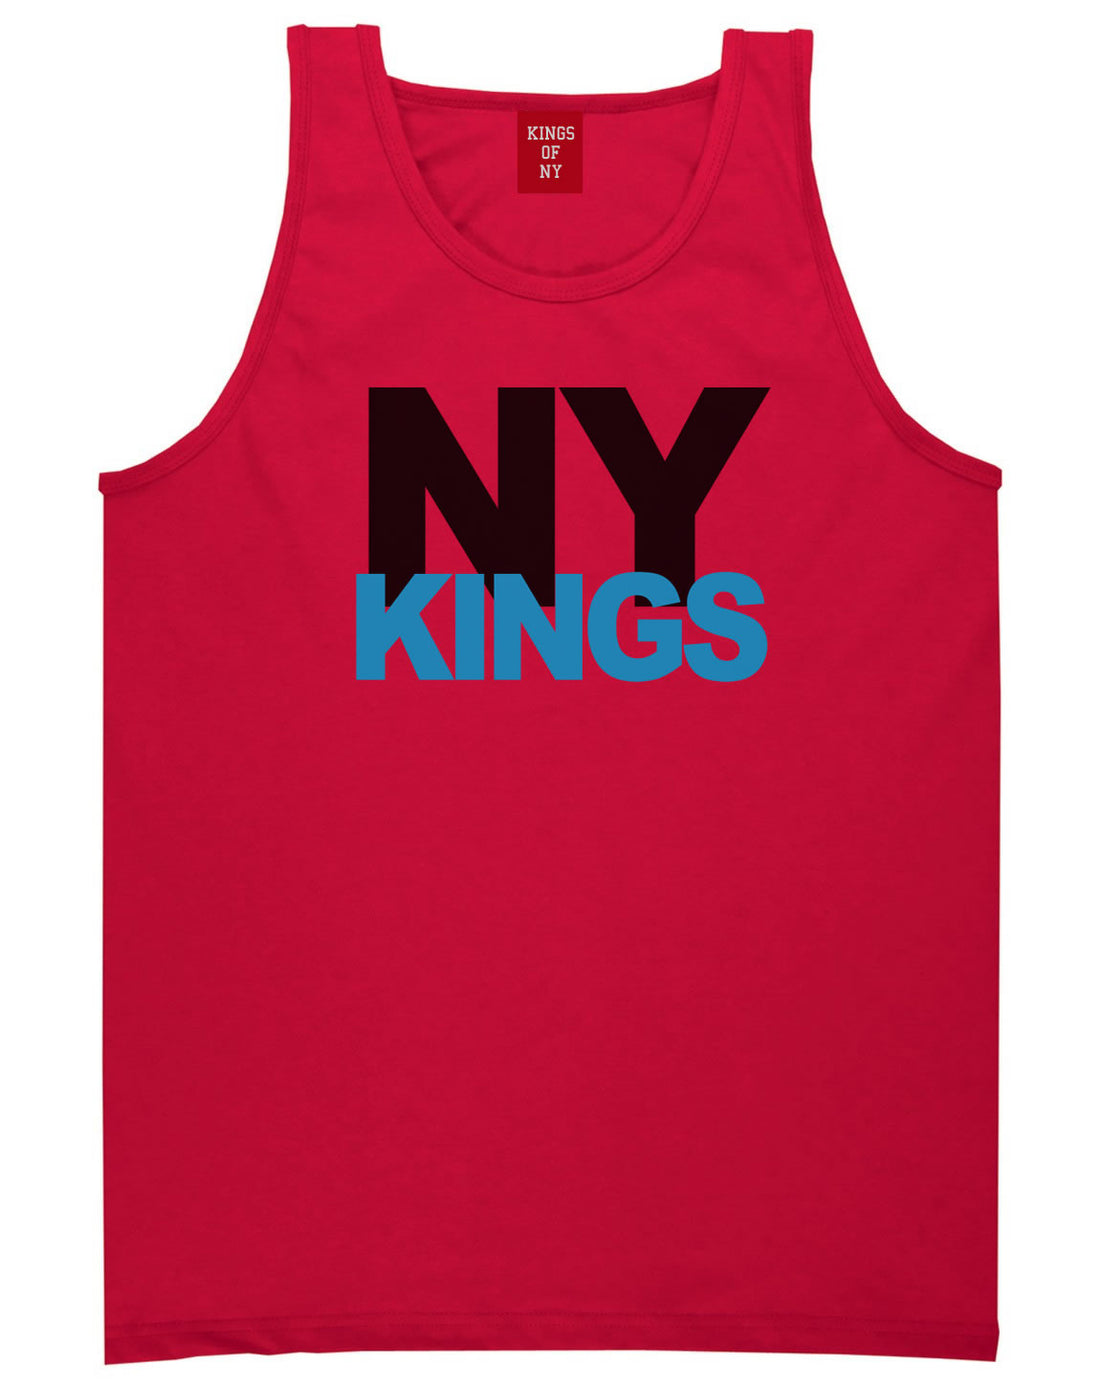 NY Kings Knows Tank Top in Red By Kings Of NY